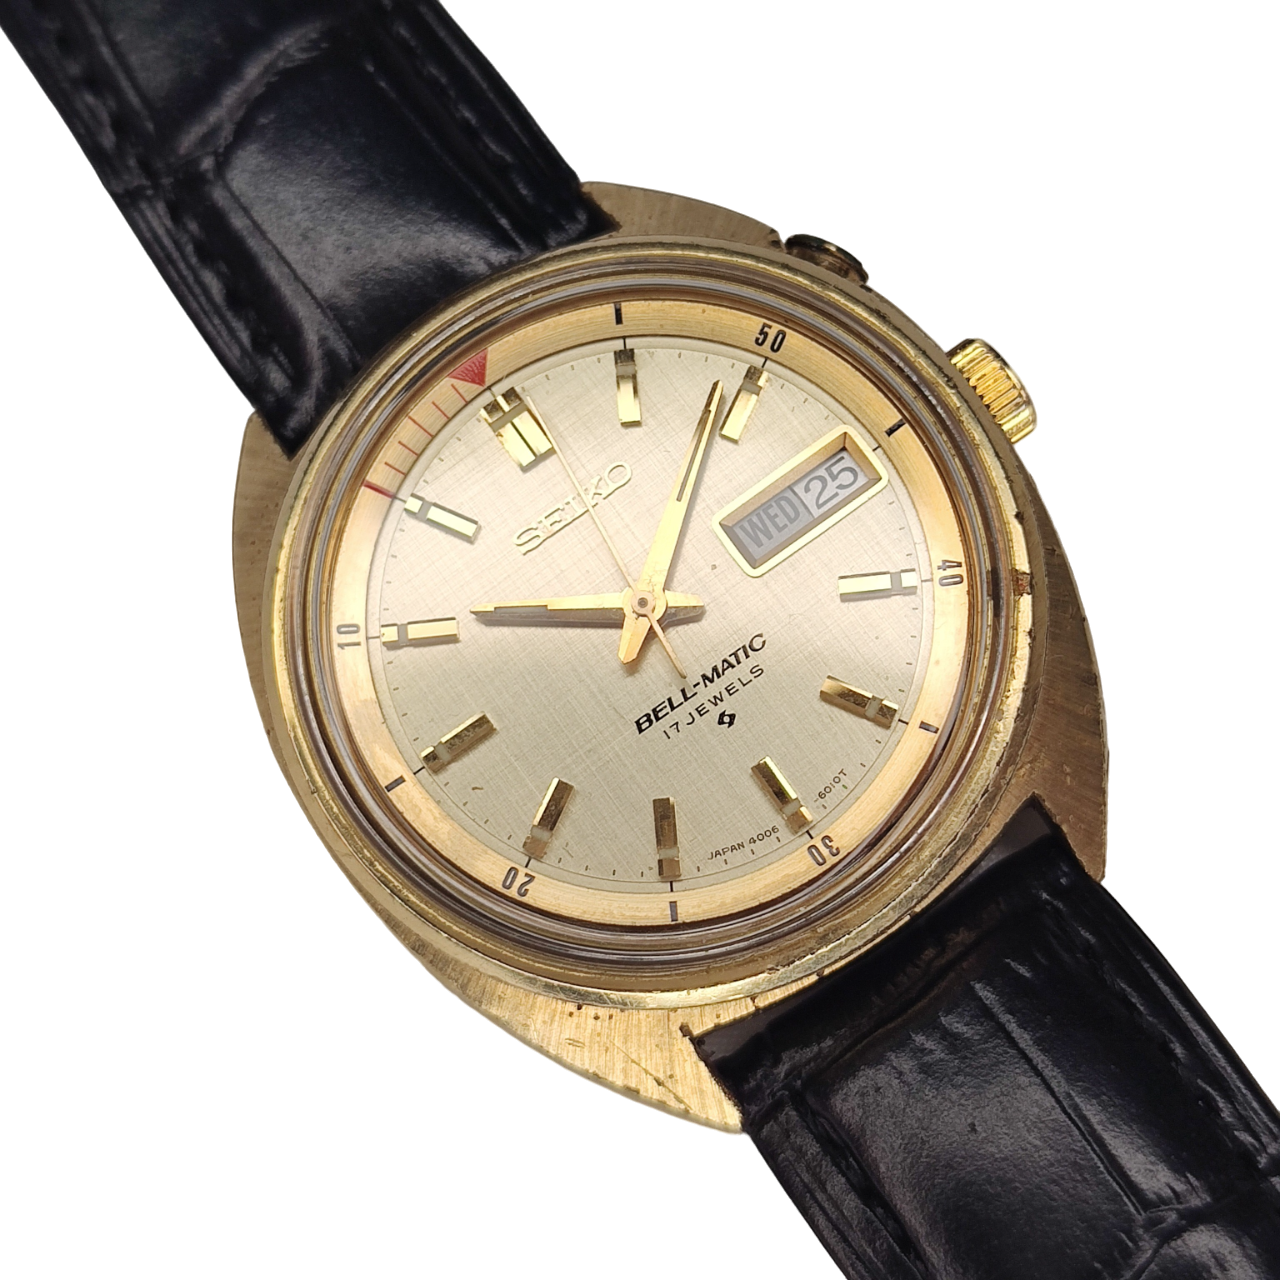 Seiko Bell-Matic vintage 4006-6011 1971 Linen dial – Temple of Time